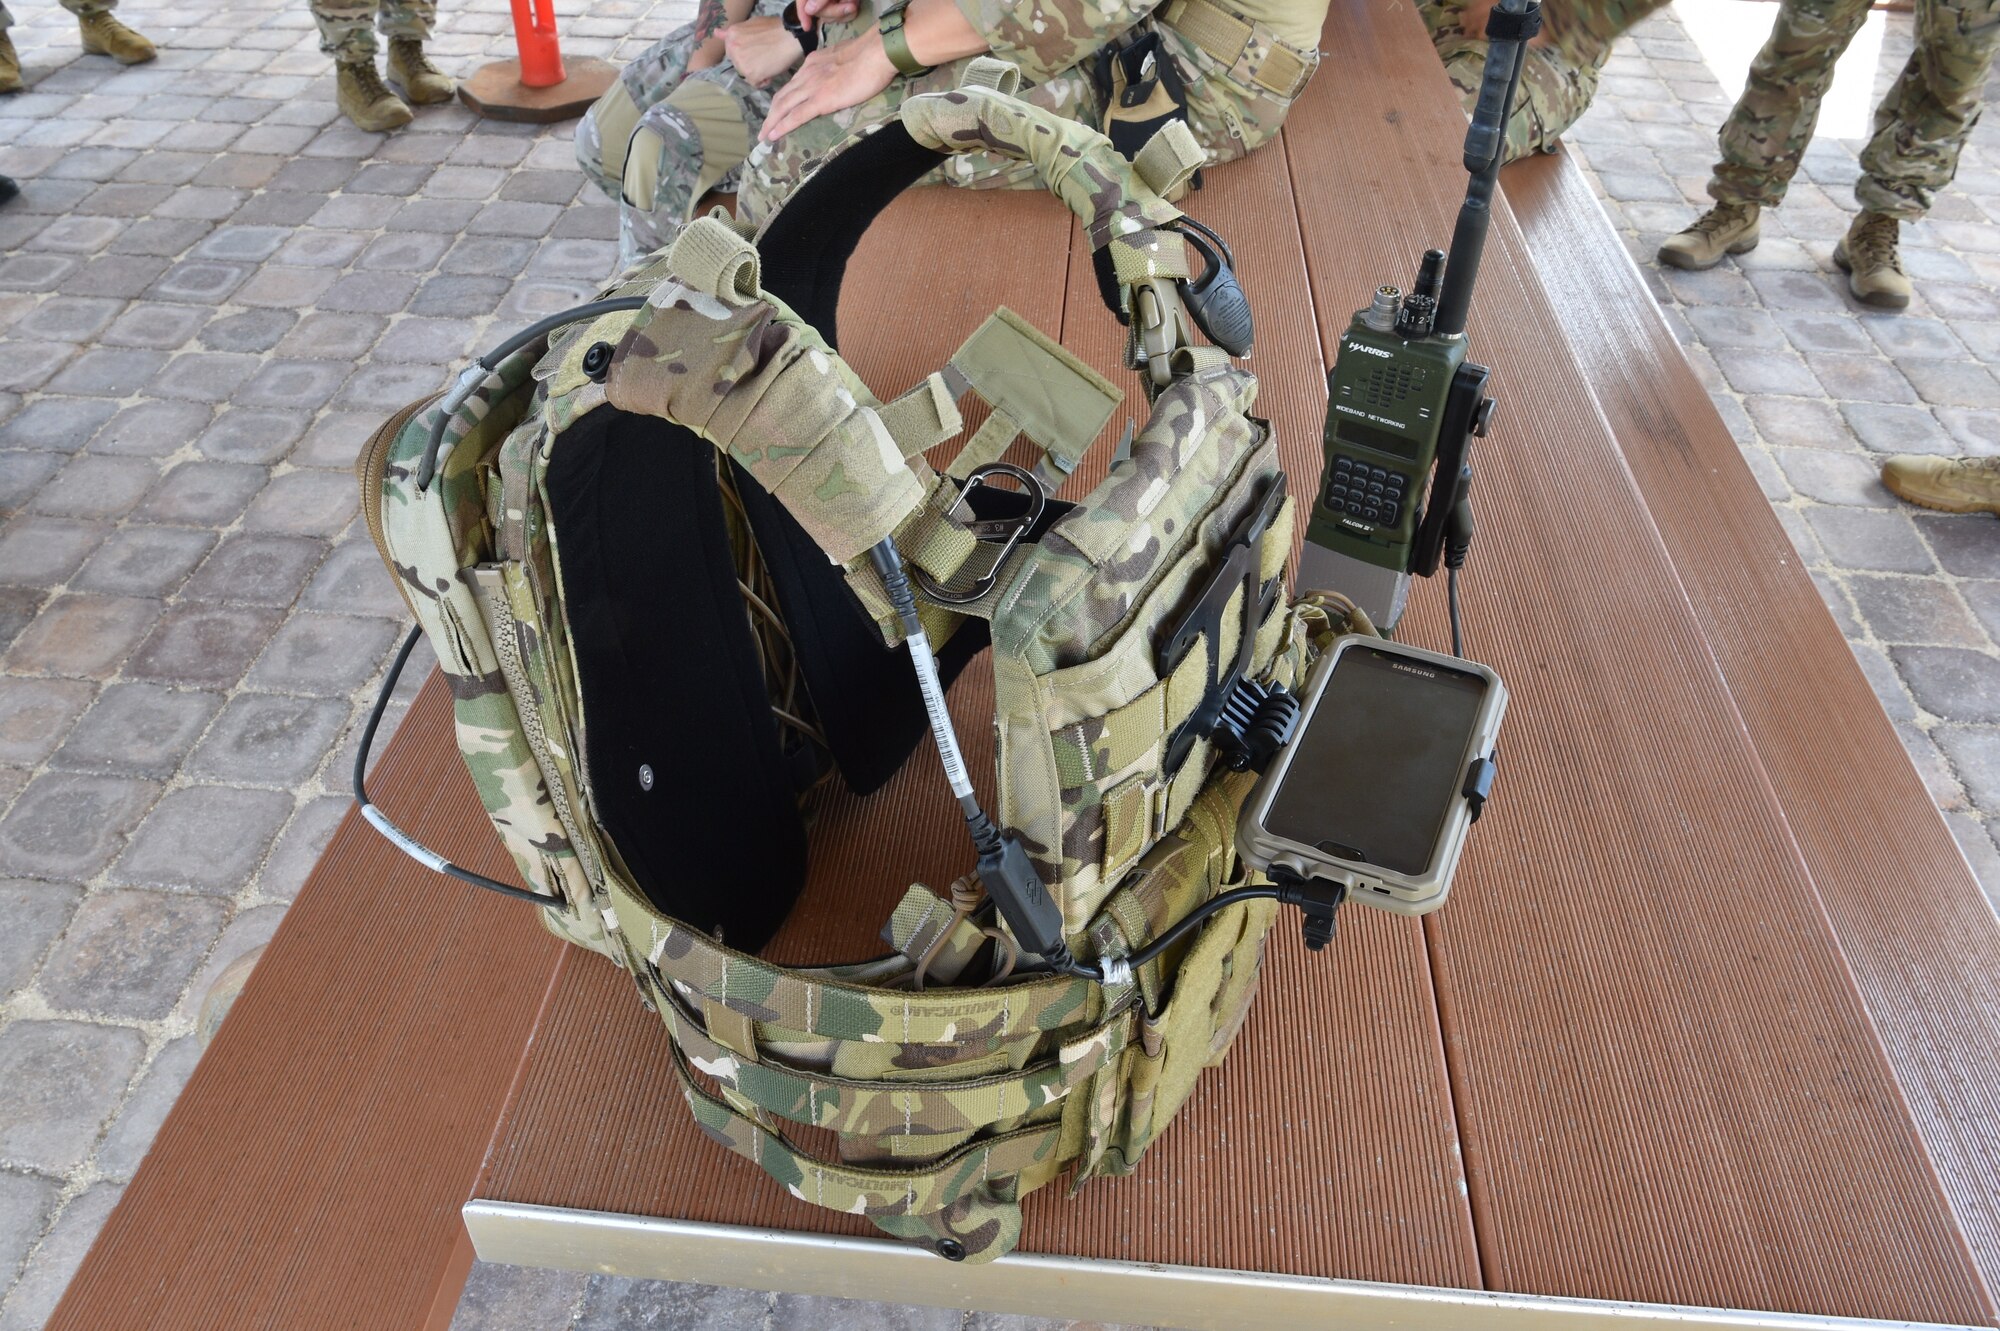 The EvolutionONE GPS and communication system is designed to attach to the body armor worn by servicemembers as shown at Joint Base Pearl Harbor-Hickam, Hawaii, August 4, 2020. Airmen from the 25th Air Support Operation Squadron spent multiple days in different training scenarios to learn how to operate the system. (U.S. Air Force photo by 2nd Lt. Benjamin Aronson)